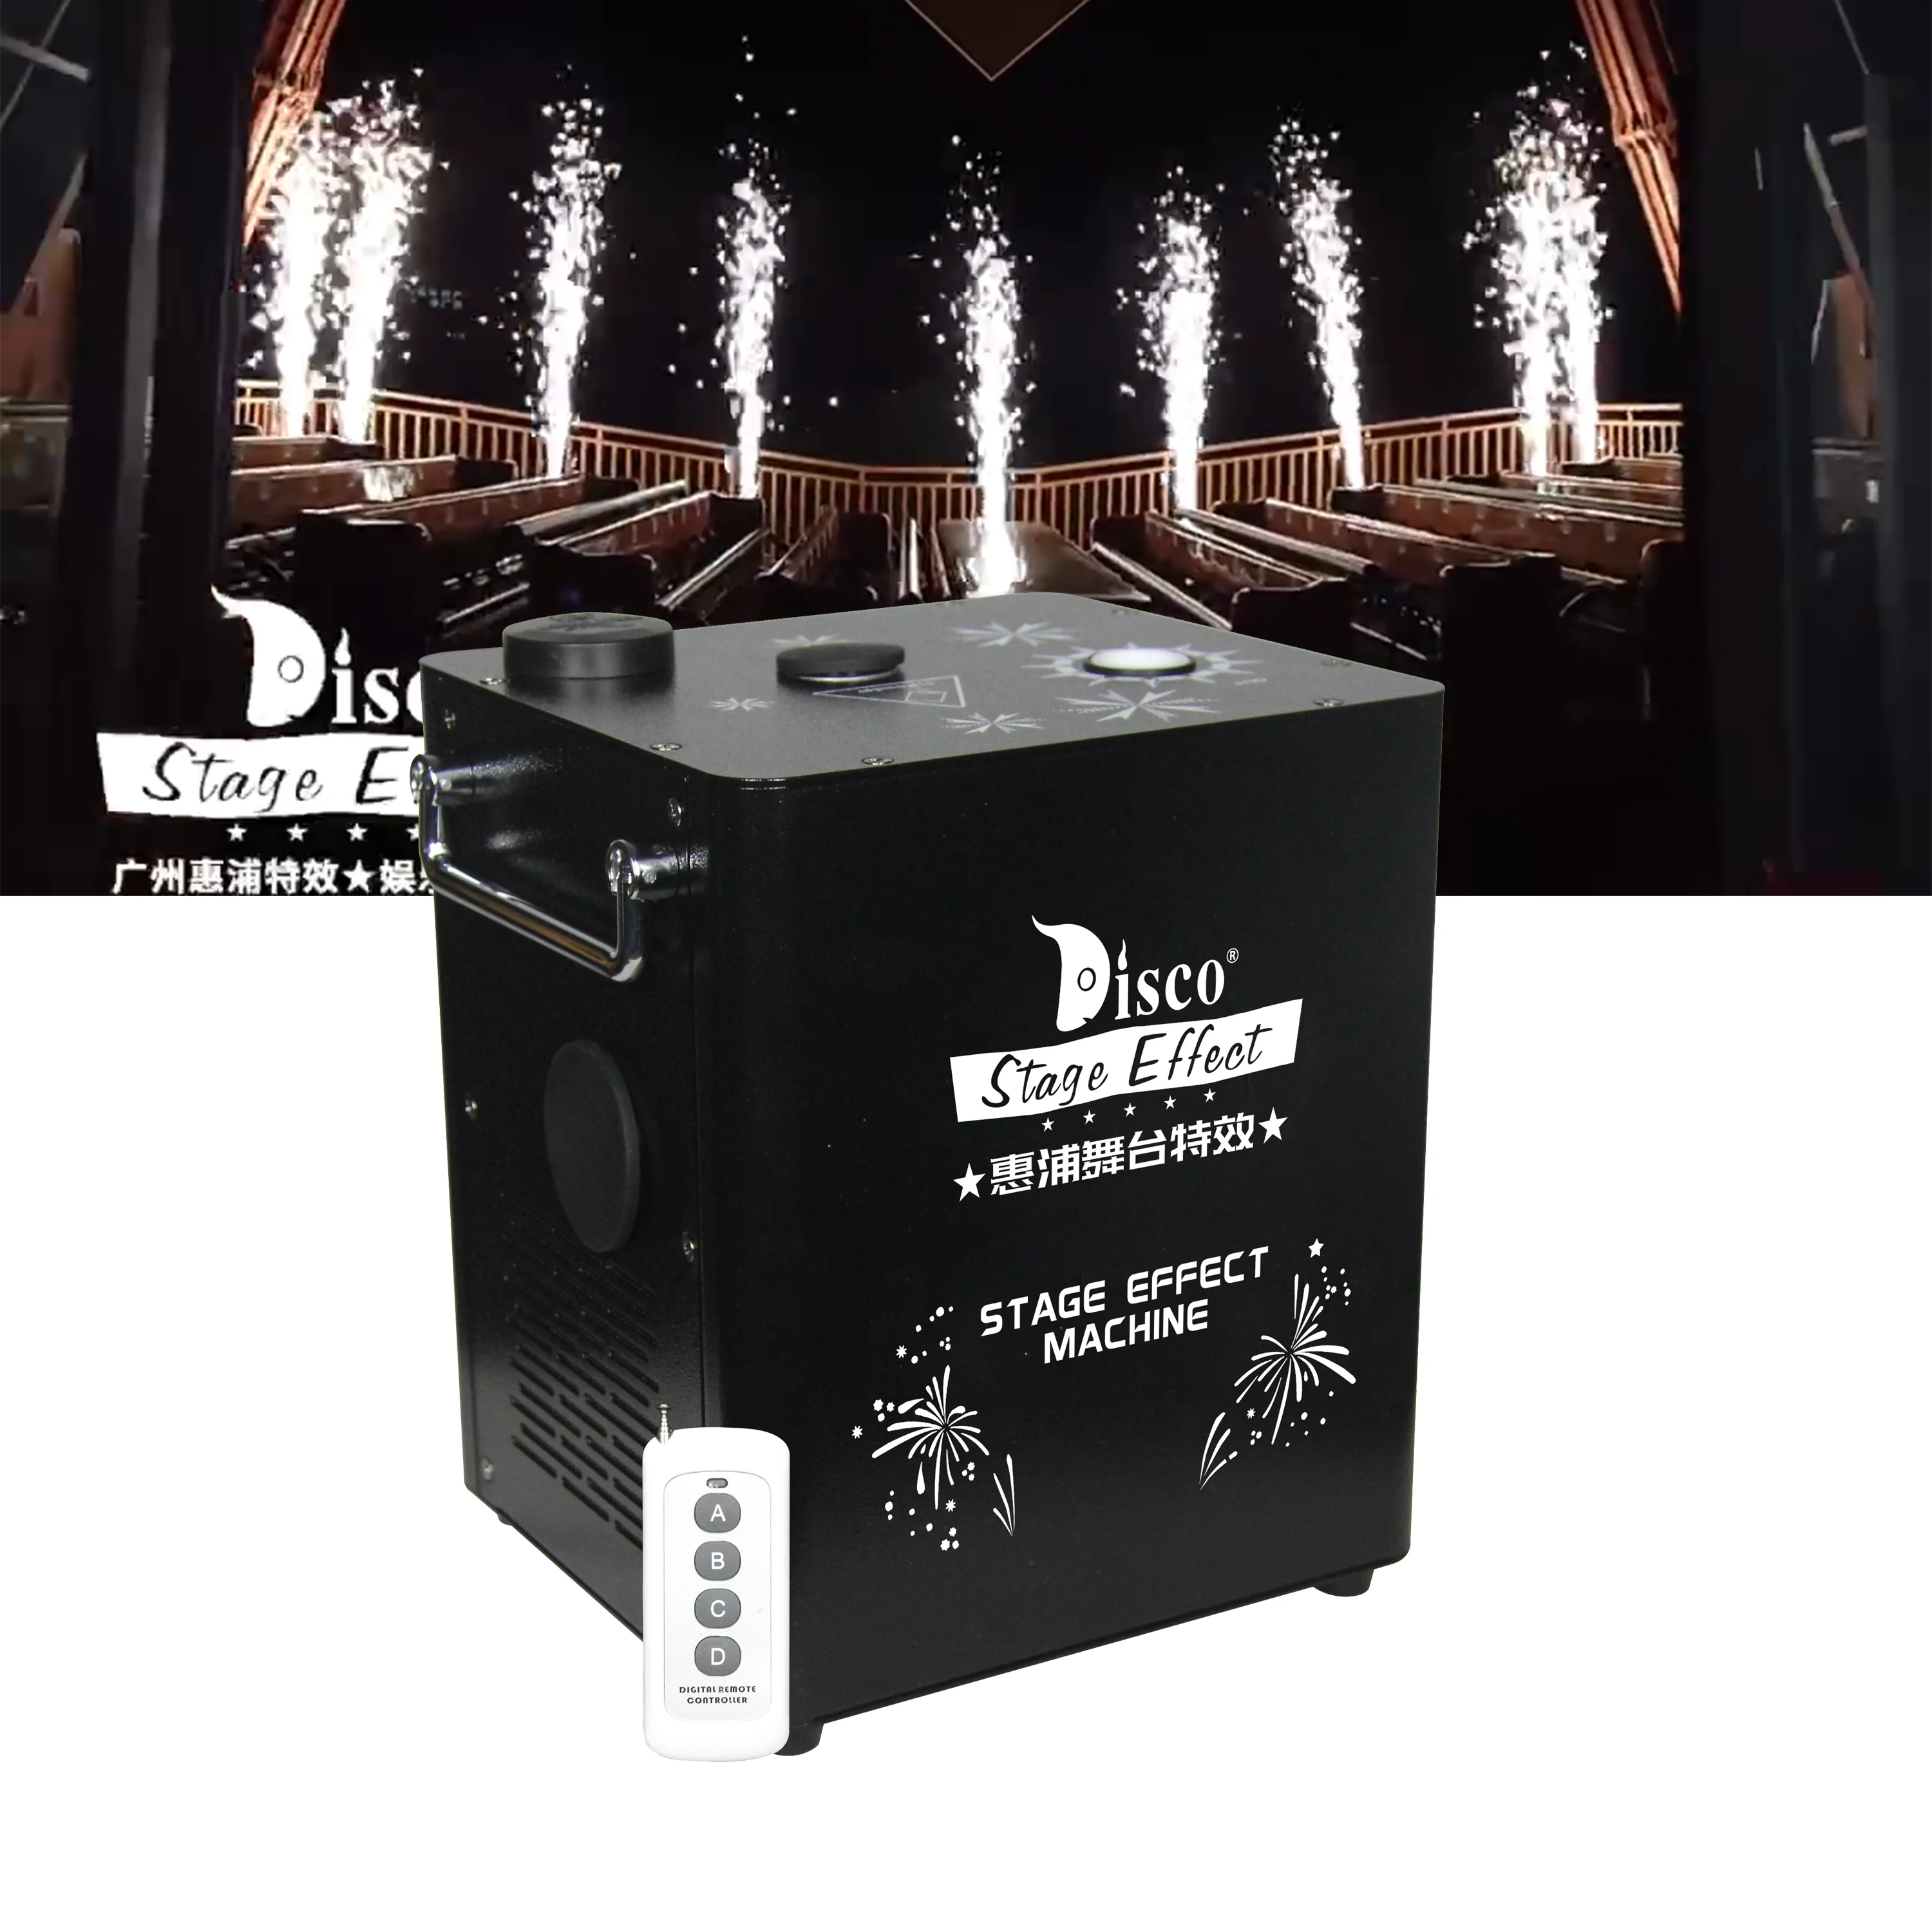 

Spark Machine, Whirling Cold Firework Machine For Outdoor Party And Stage Performance Wedding Bars Music Festivals